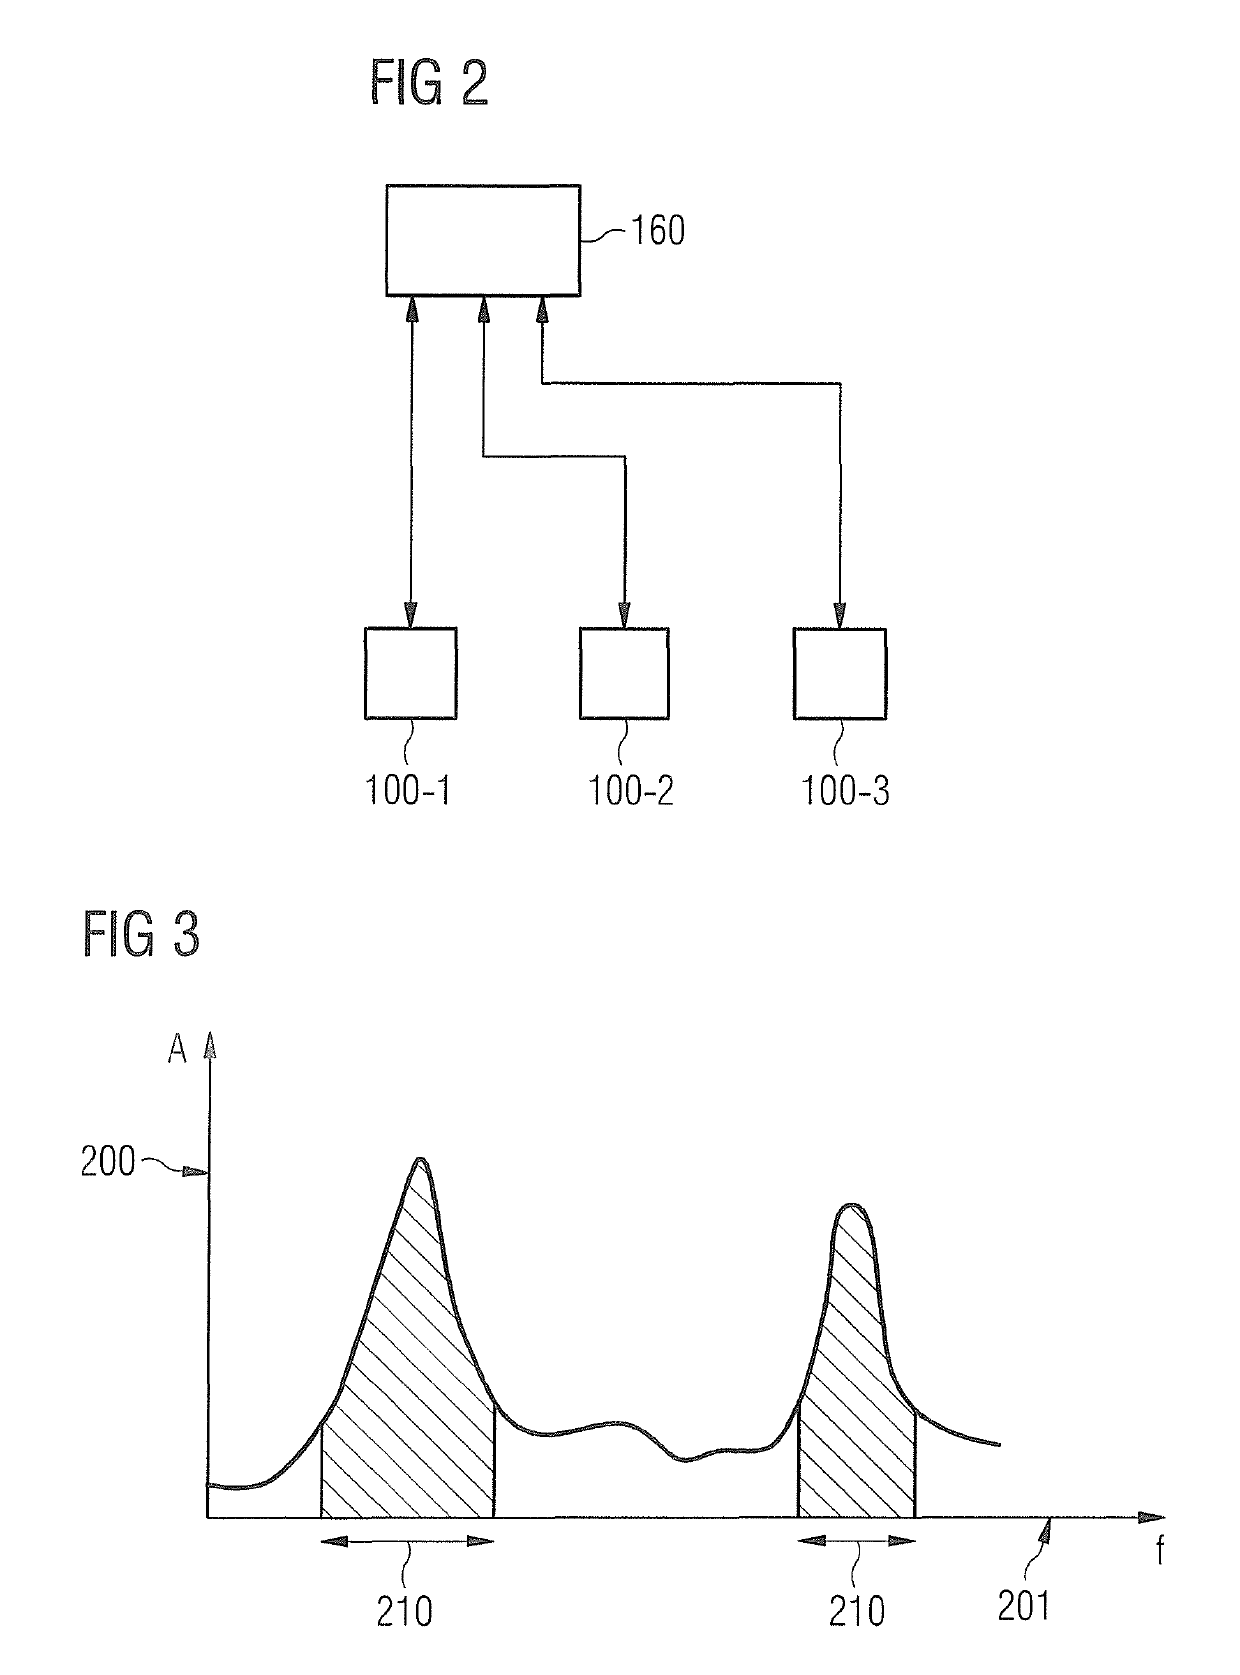 Frequency monitoring of gradient pulses during magnetic resonance imaging